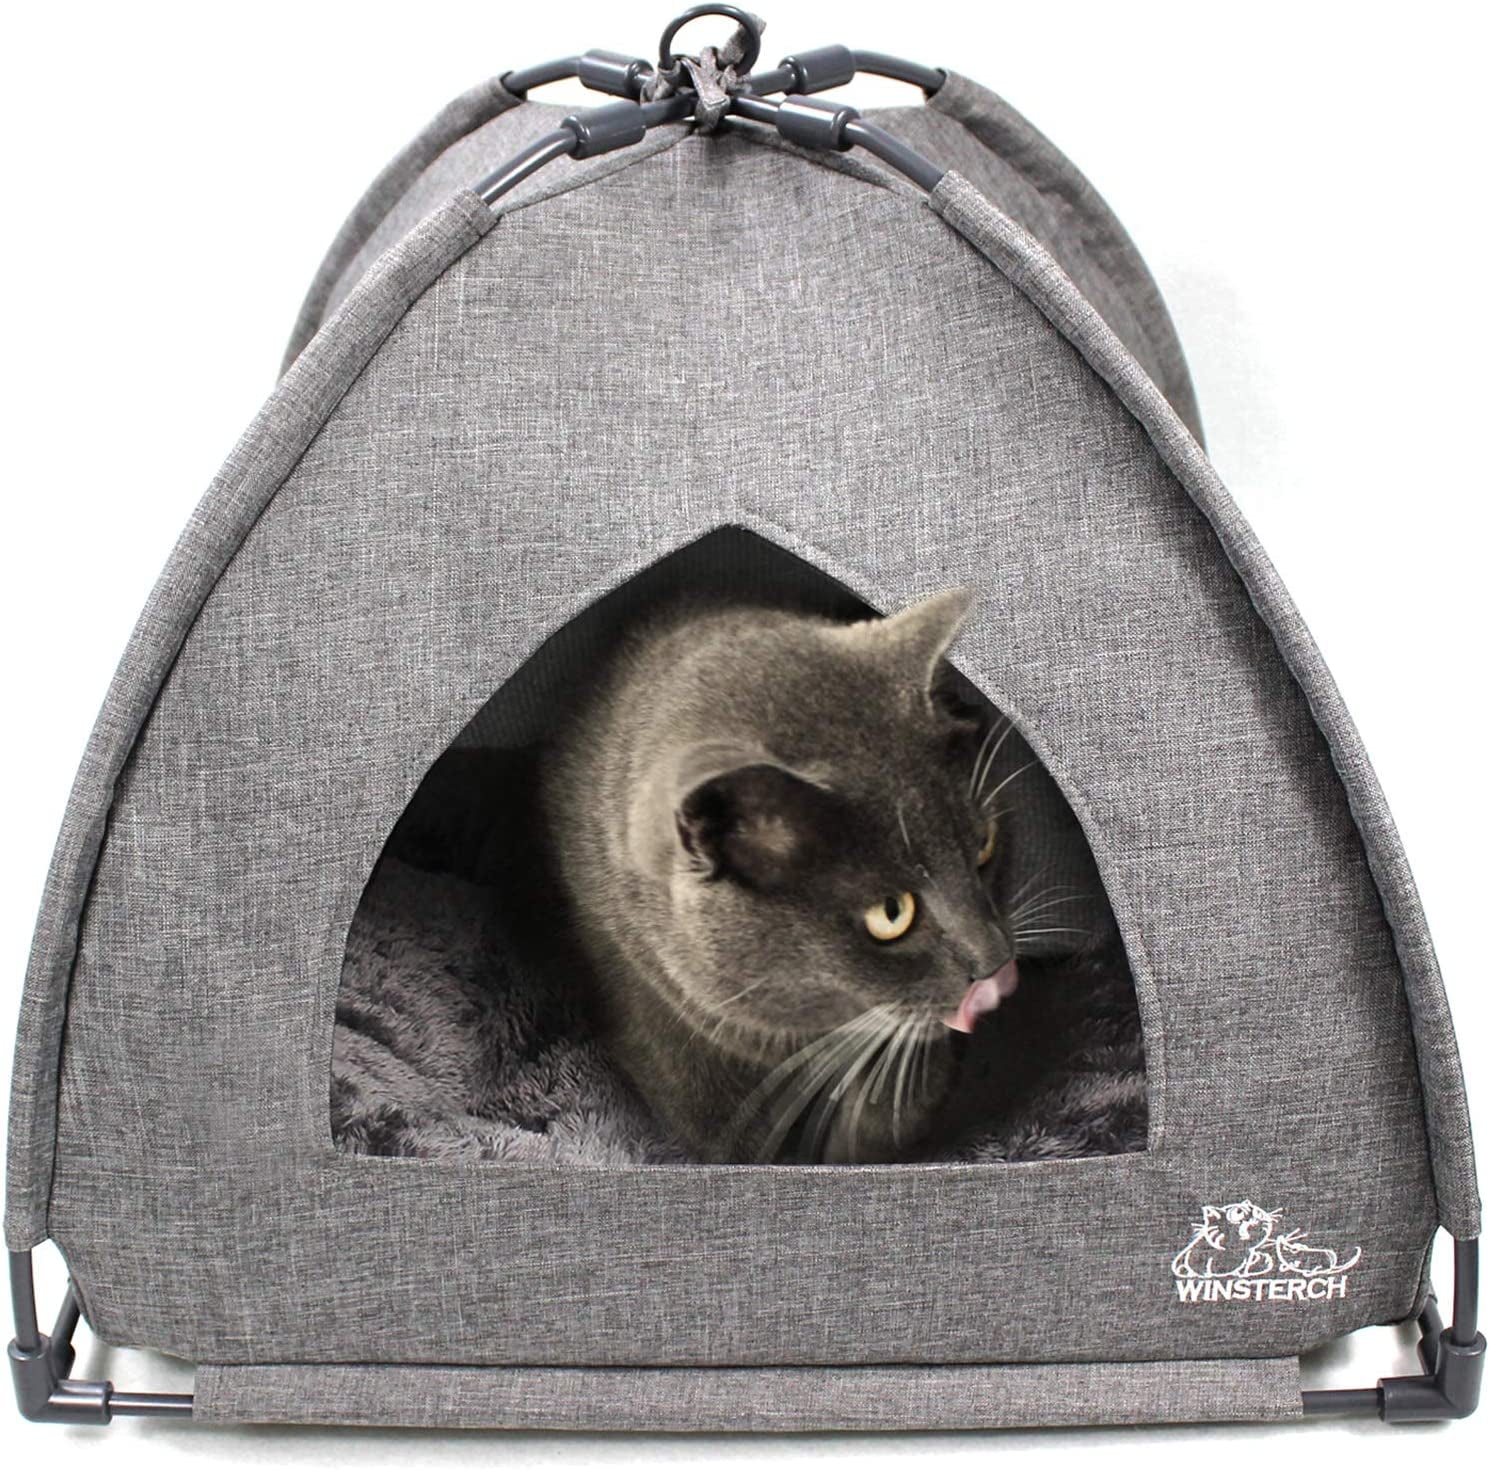 Winsterch Cat Bed for Indoor Cats,Kitten Bed,Cat Cave Bed,Warm Enclosed Covered Cat Tent,Outdoor Cave Bed House for Cats,Puppy or Small Pets (18.5'' X 18.5'' X 15.8'', Grey)